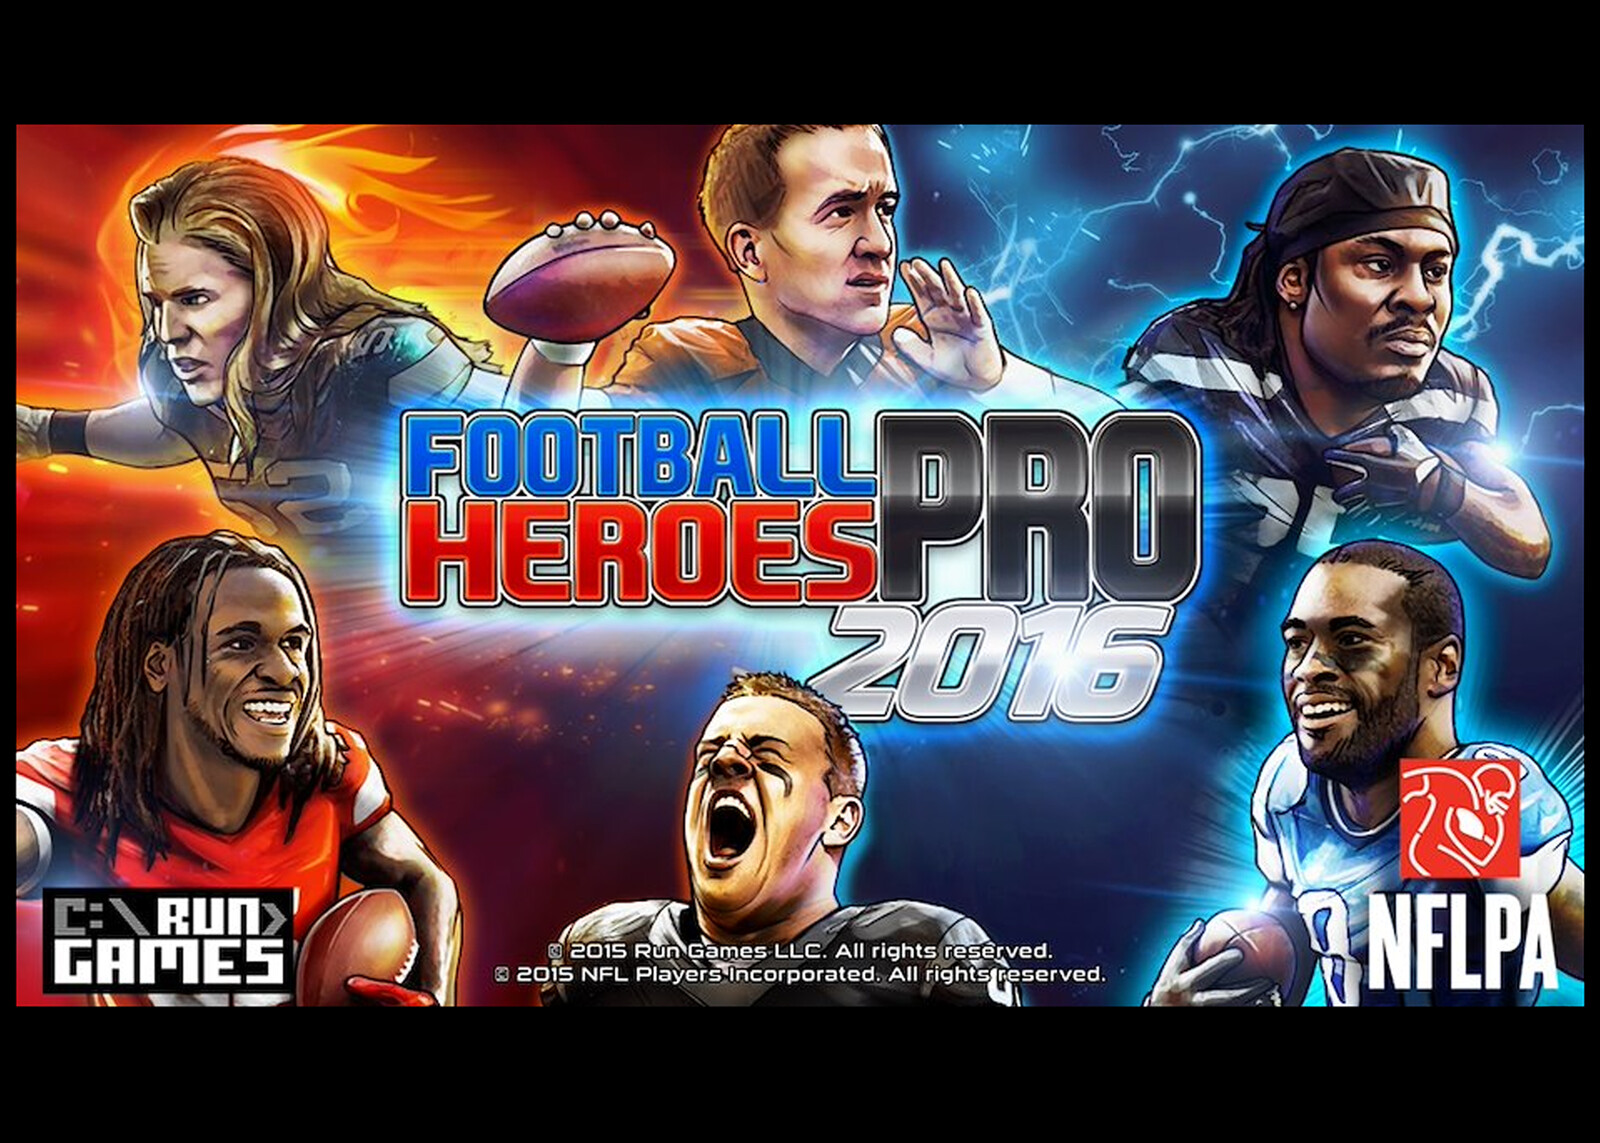 Promo marketing illustration for the 2016 edition of Football Heroes.